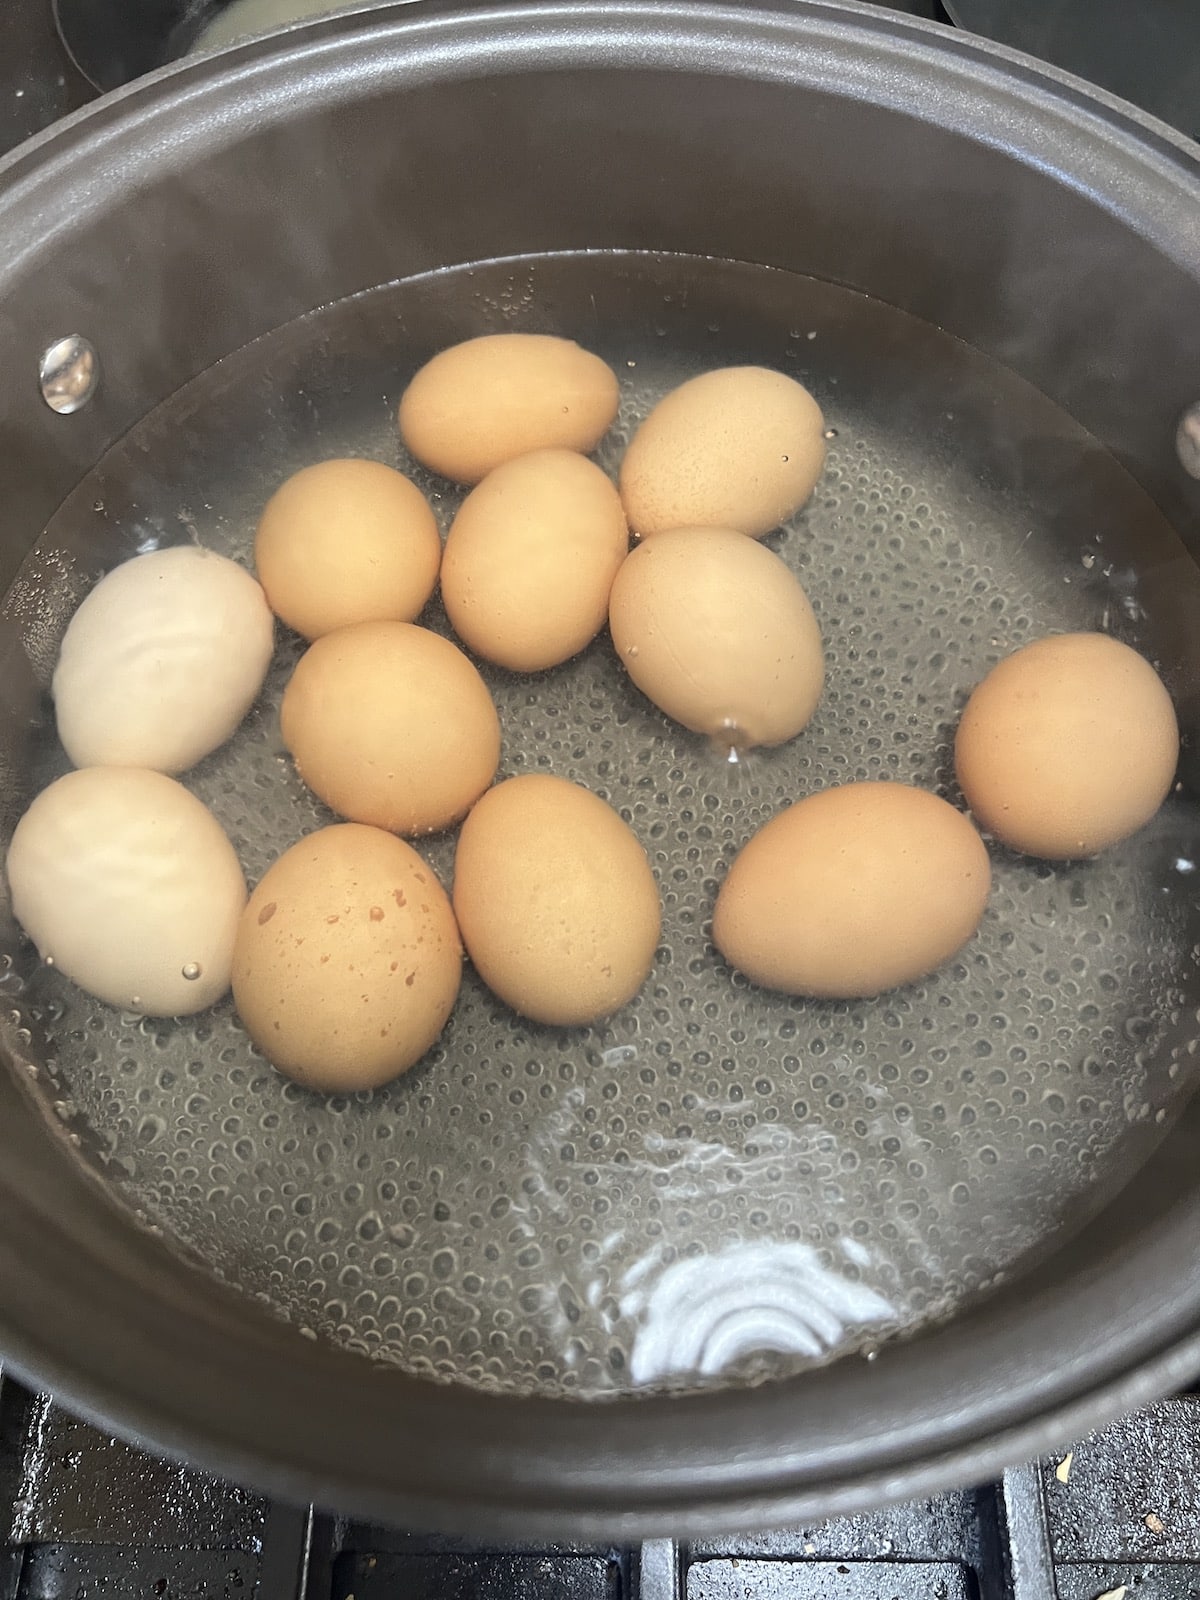 Boiling eggs in a pan.